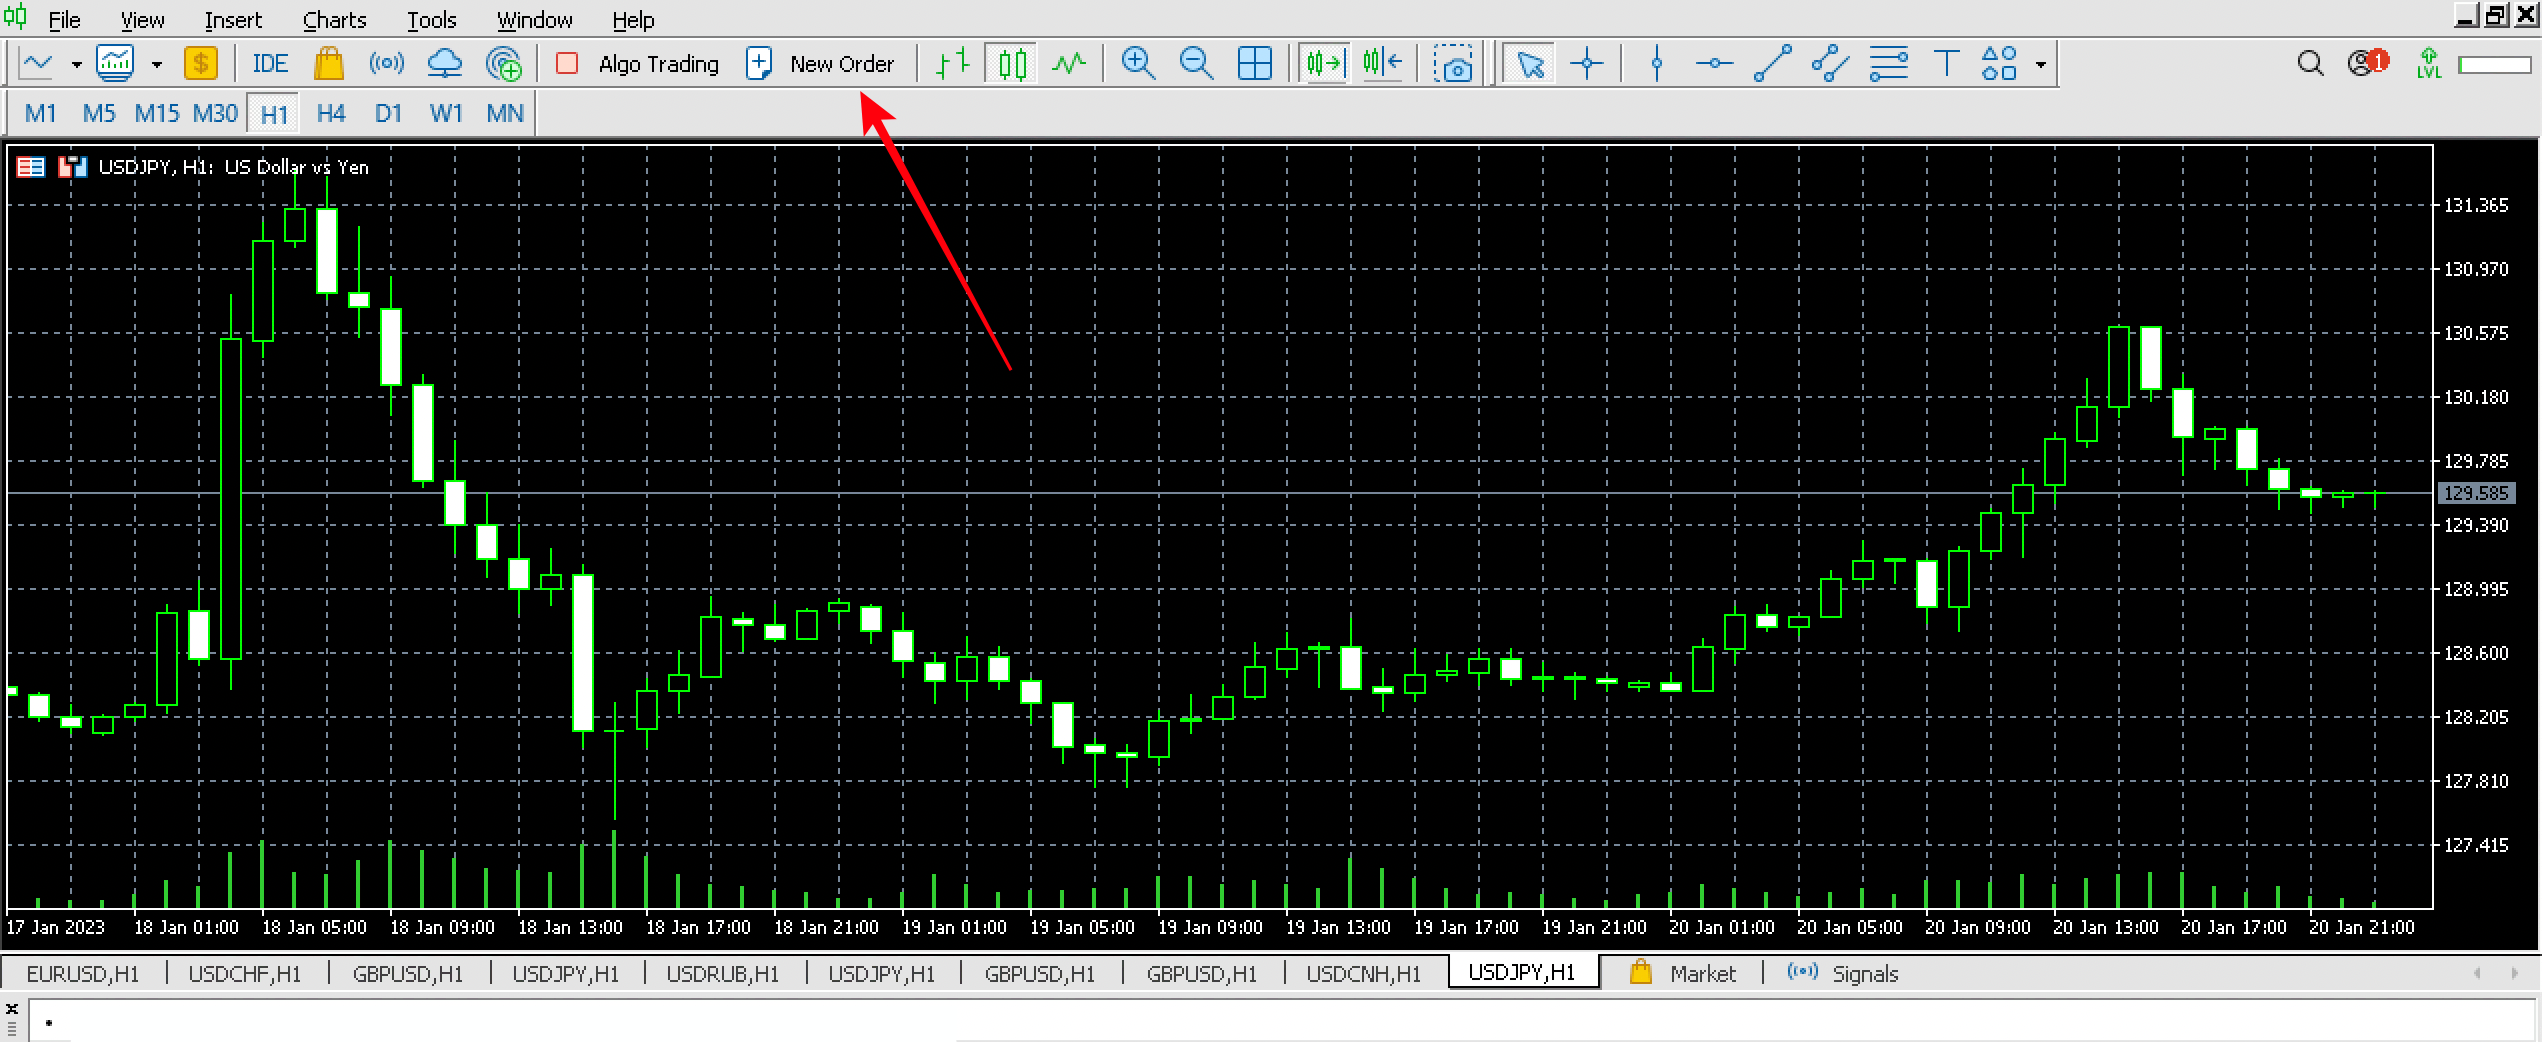 How to place an order on the MetaTrader 5